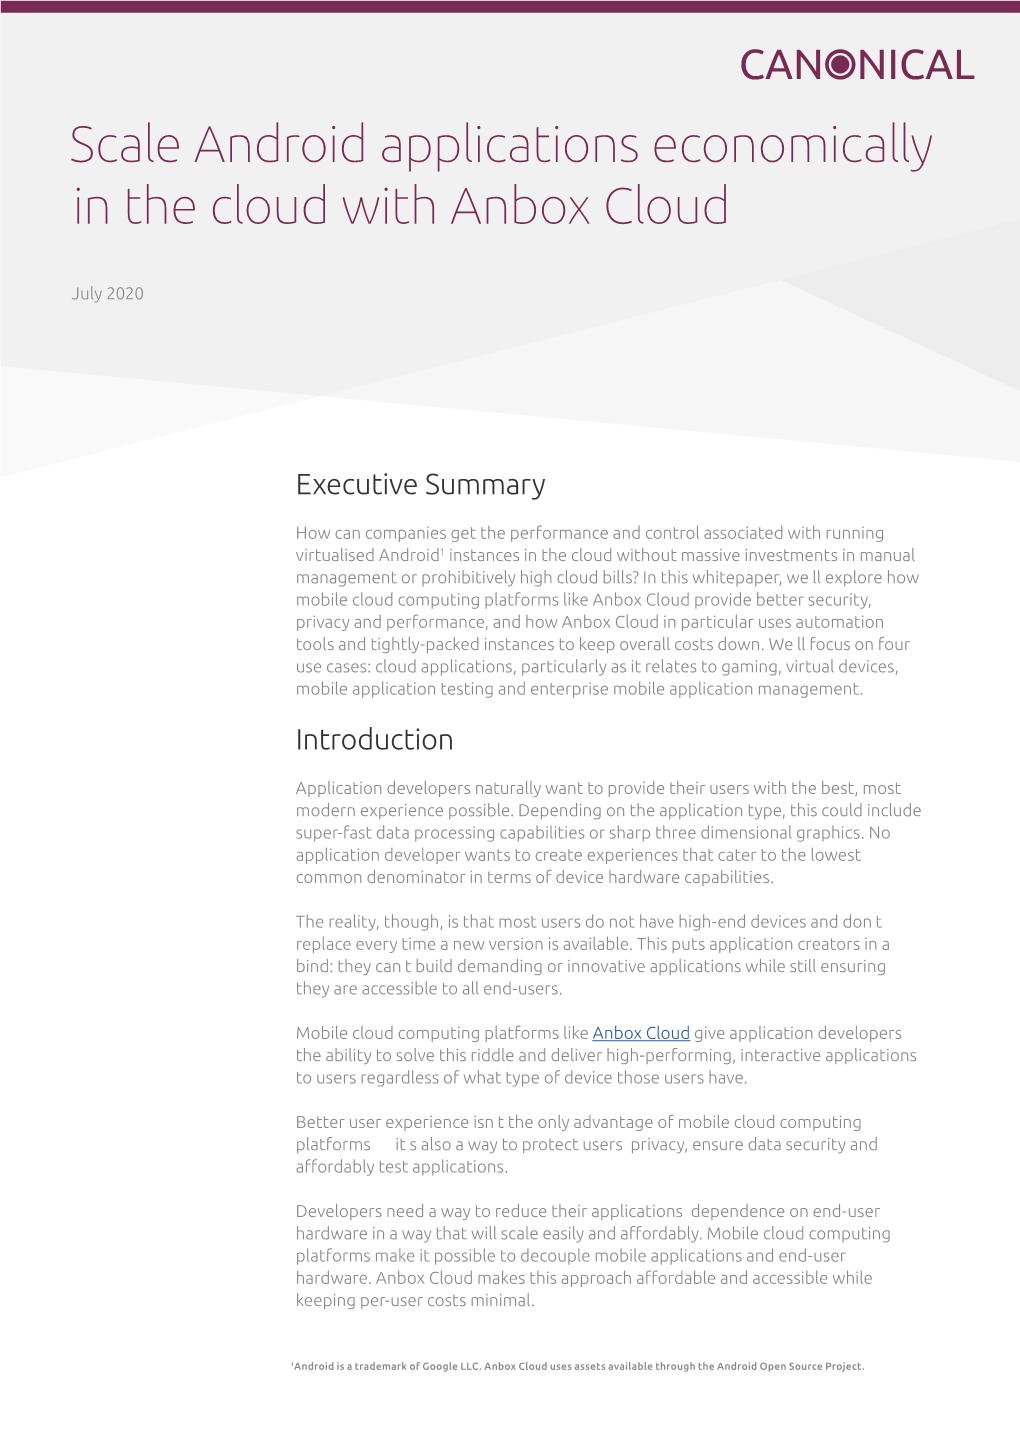 Scale Android Applications Economically in the Cloud with Anbox Cloud